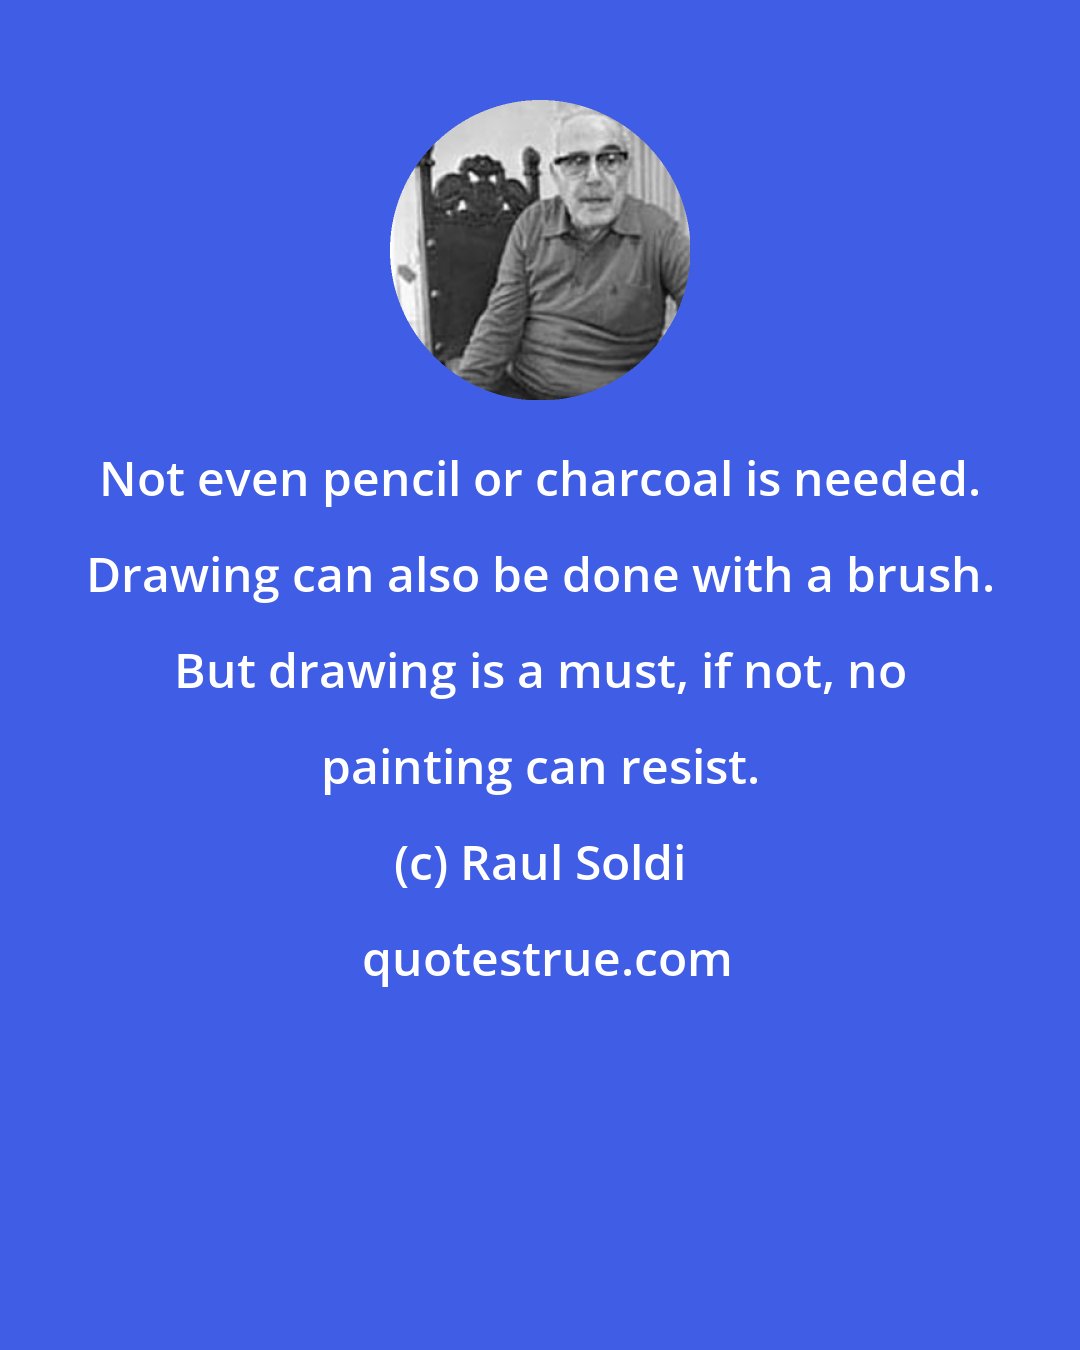 Raul Soldi: Not even pencil or charcoal is needed. Drawing can also be done with a brush. But drawing is a must, if not, no painting can resist.